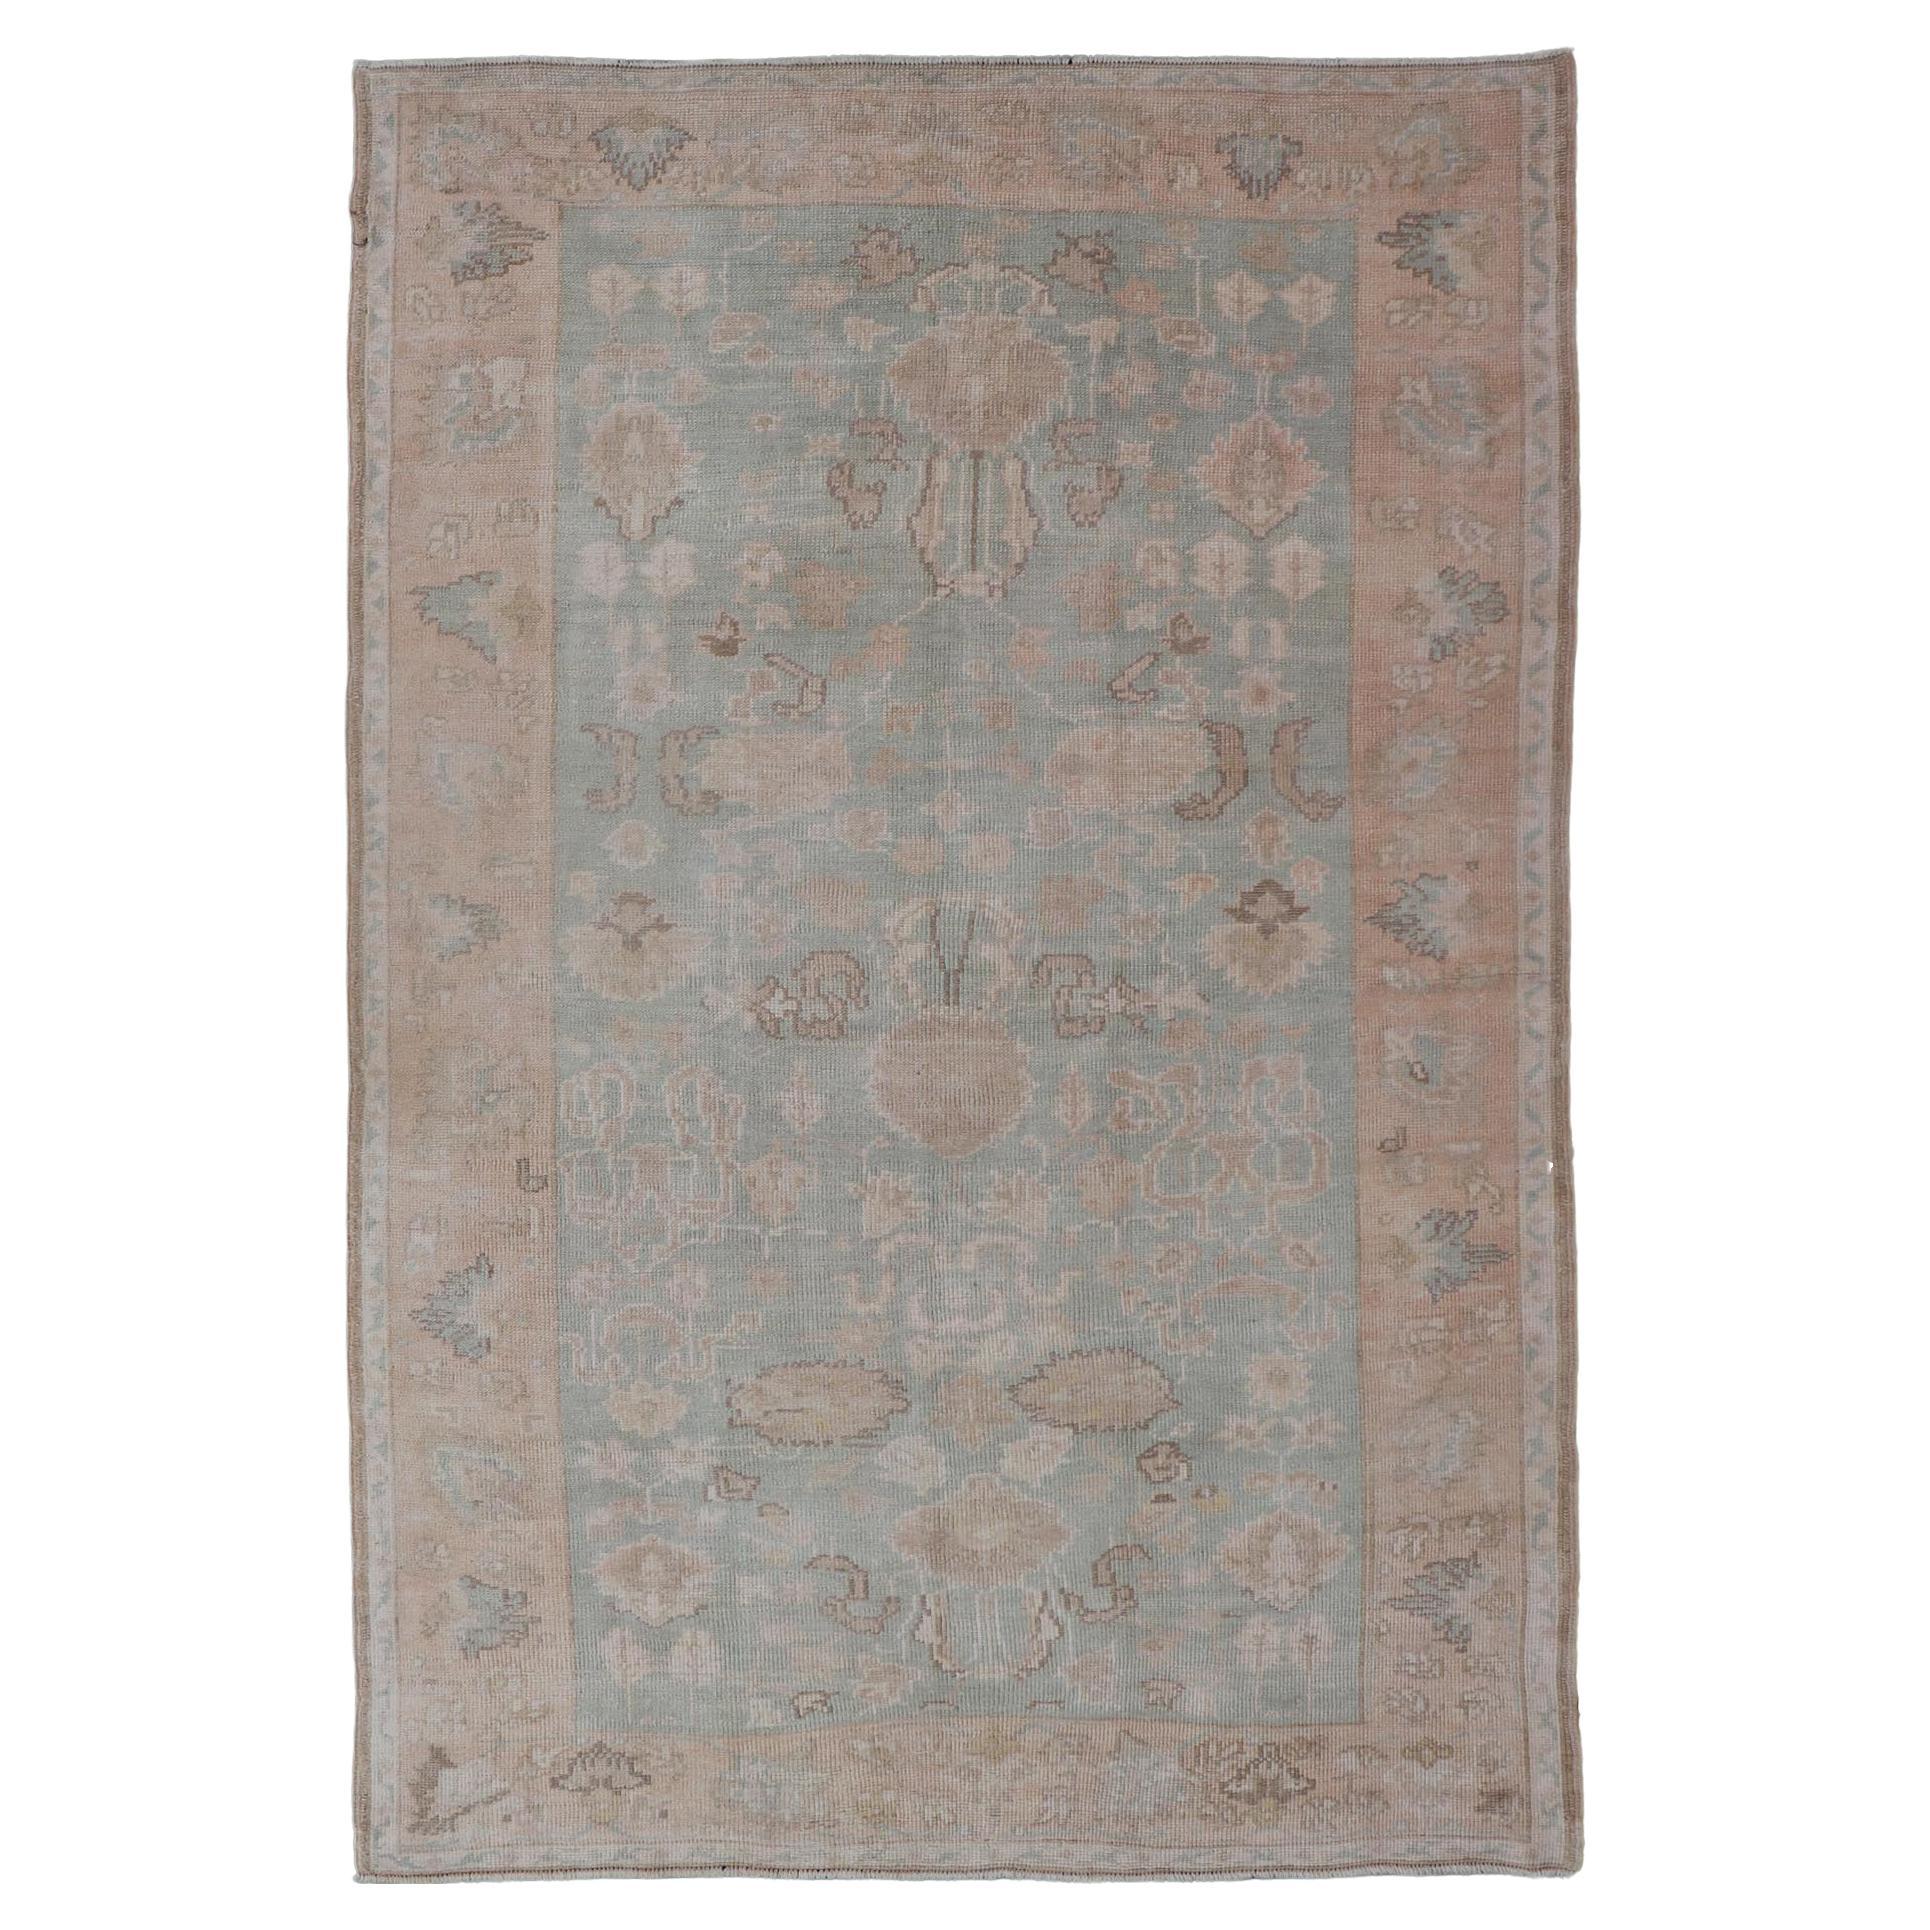 Light Colored Turkish Vintage Oushak Rug with All-Over Design in Light Green